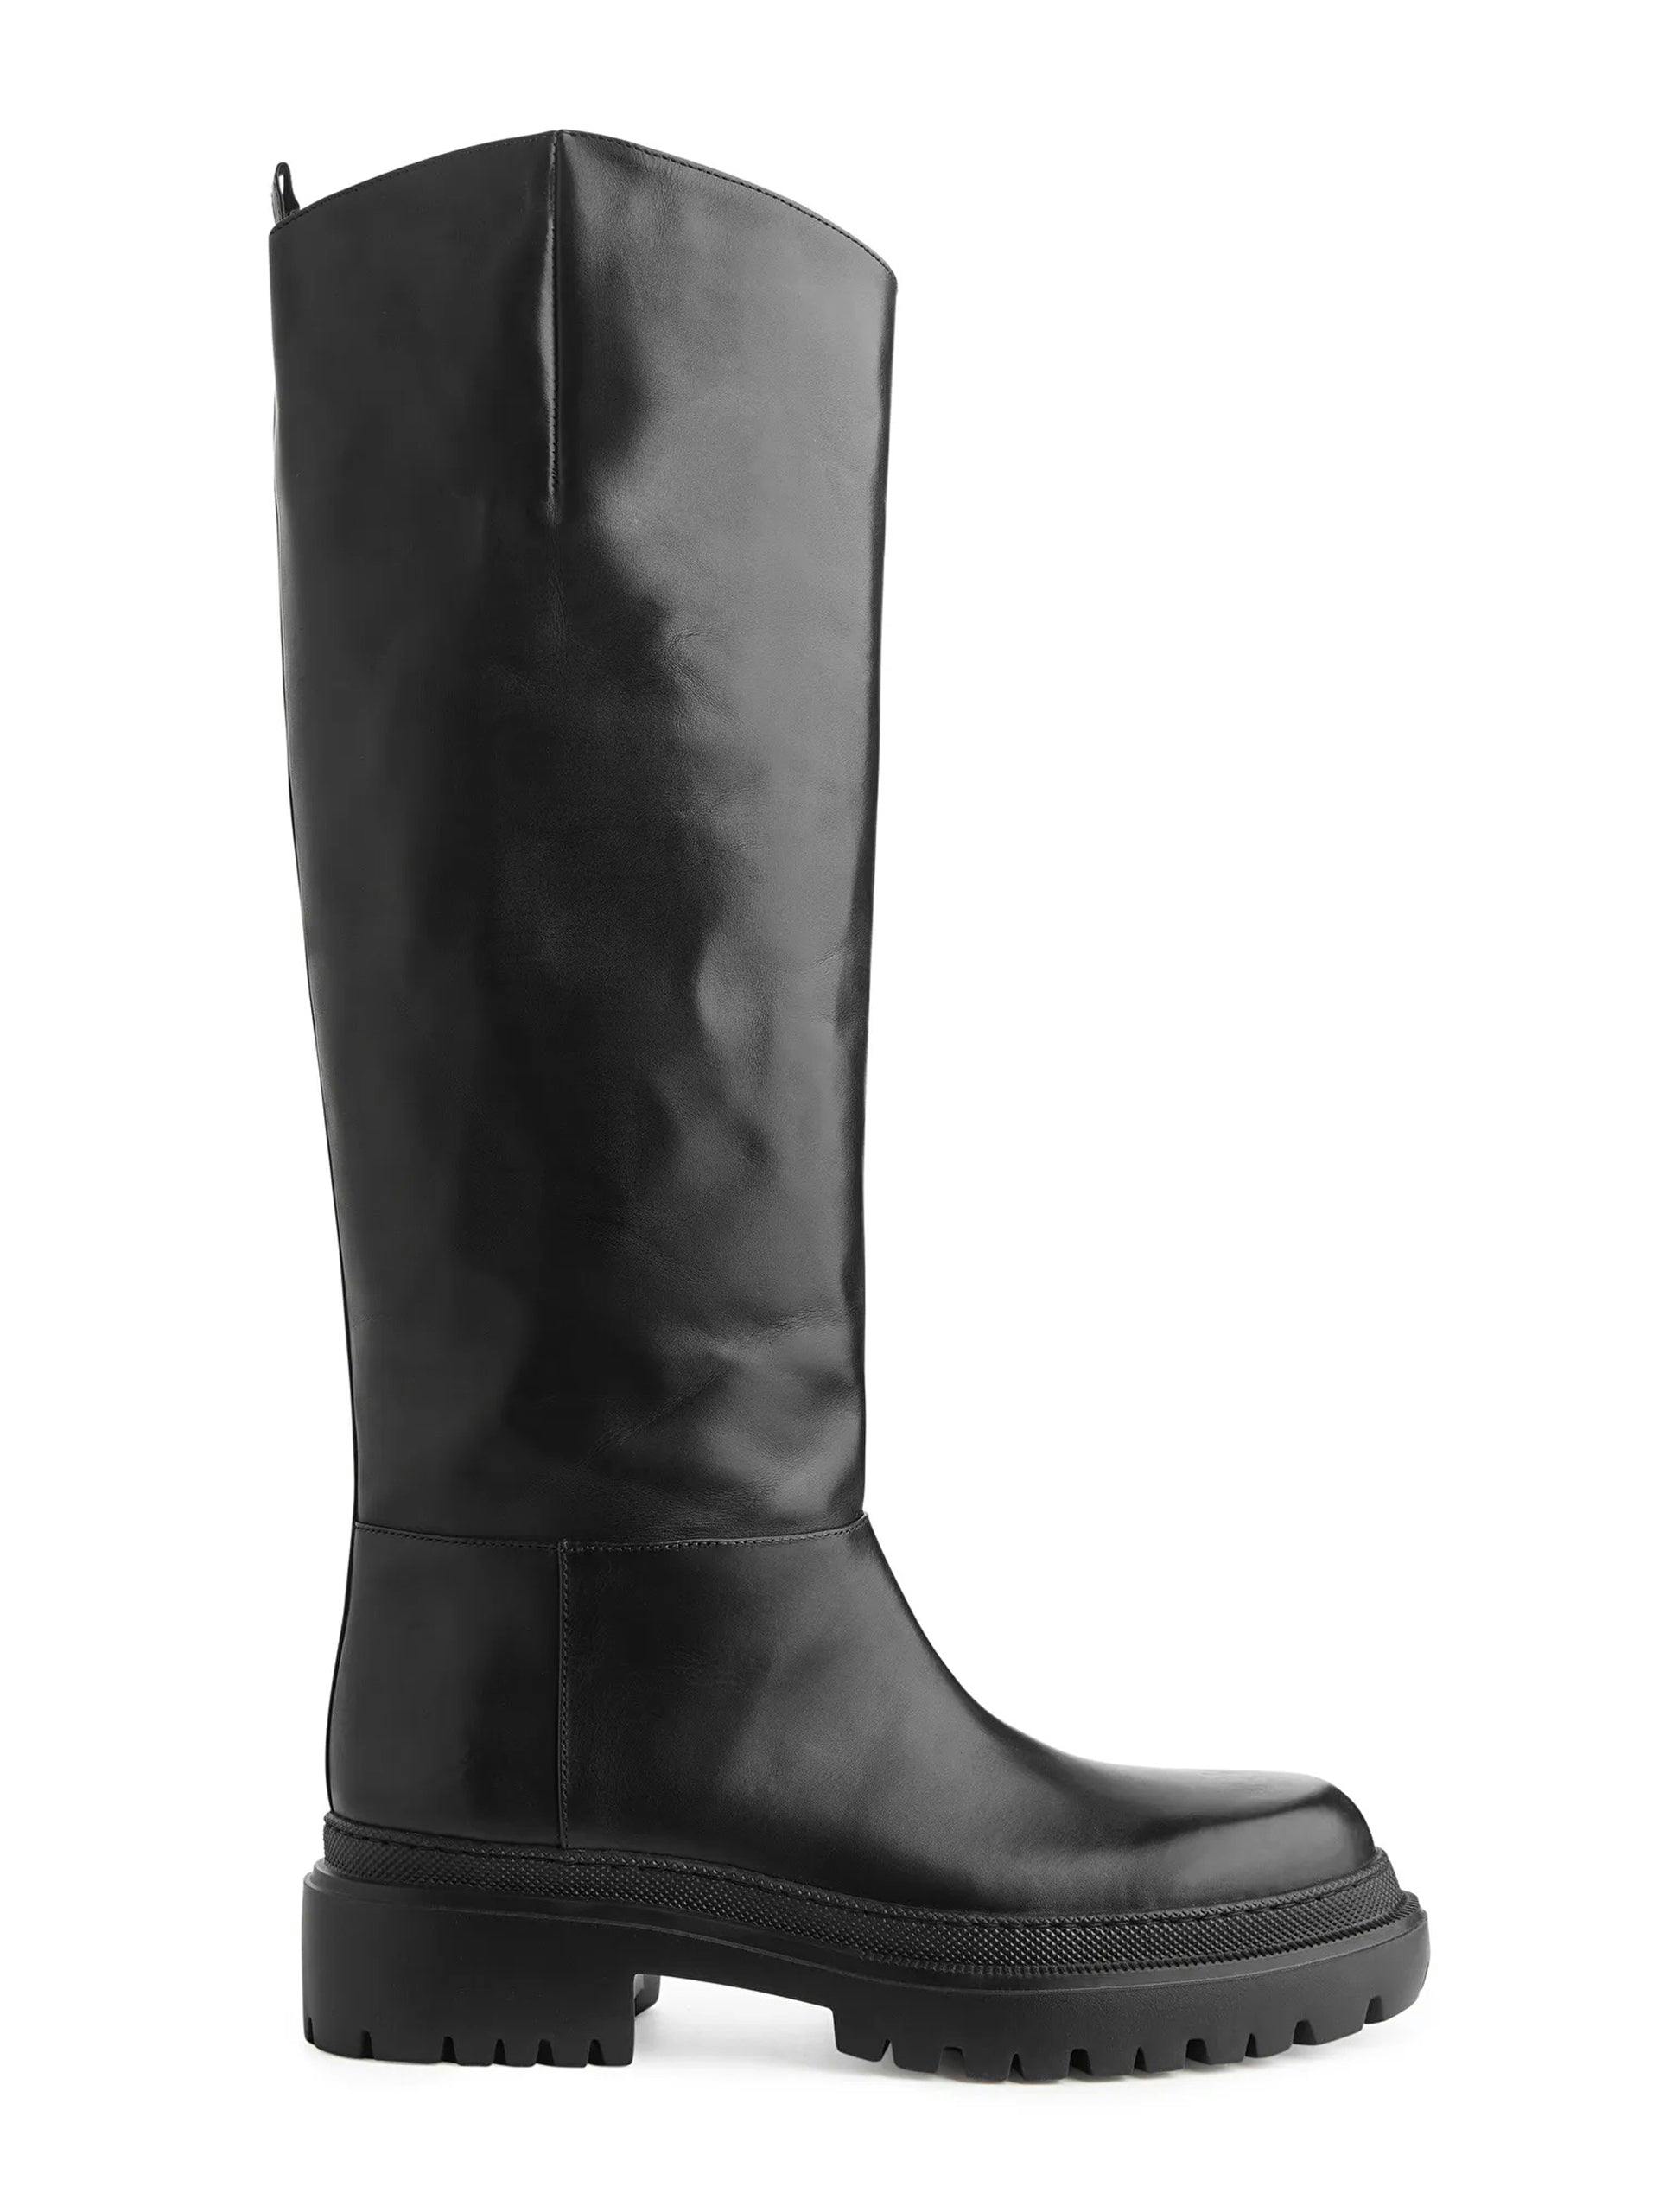 Black chunky leather boots